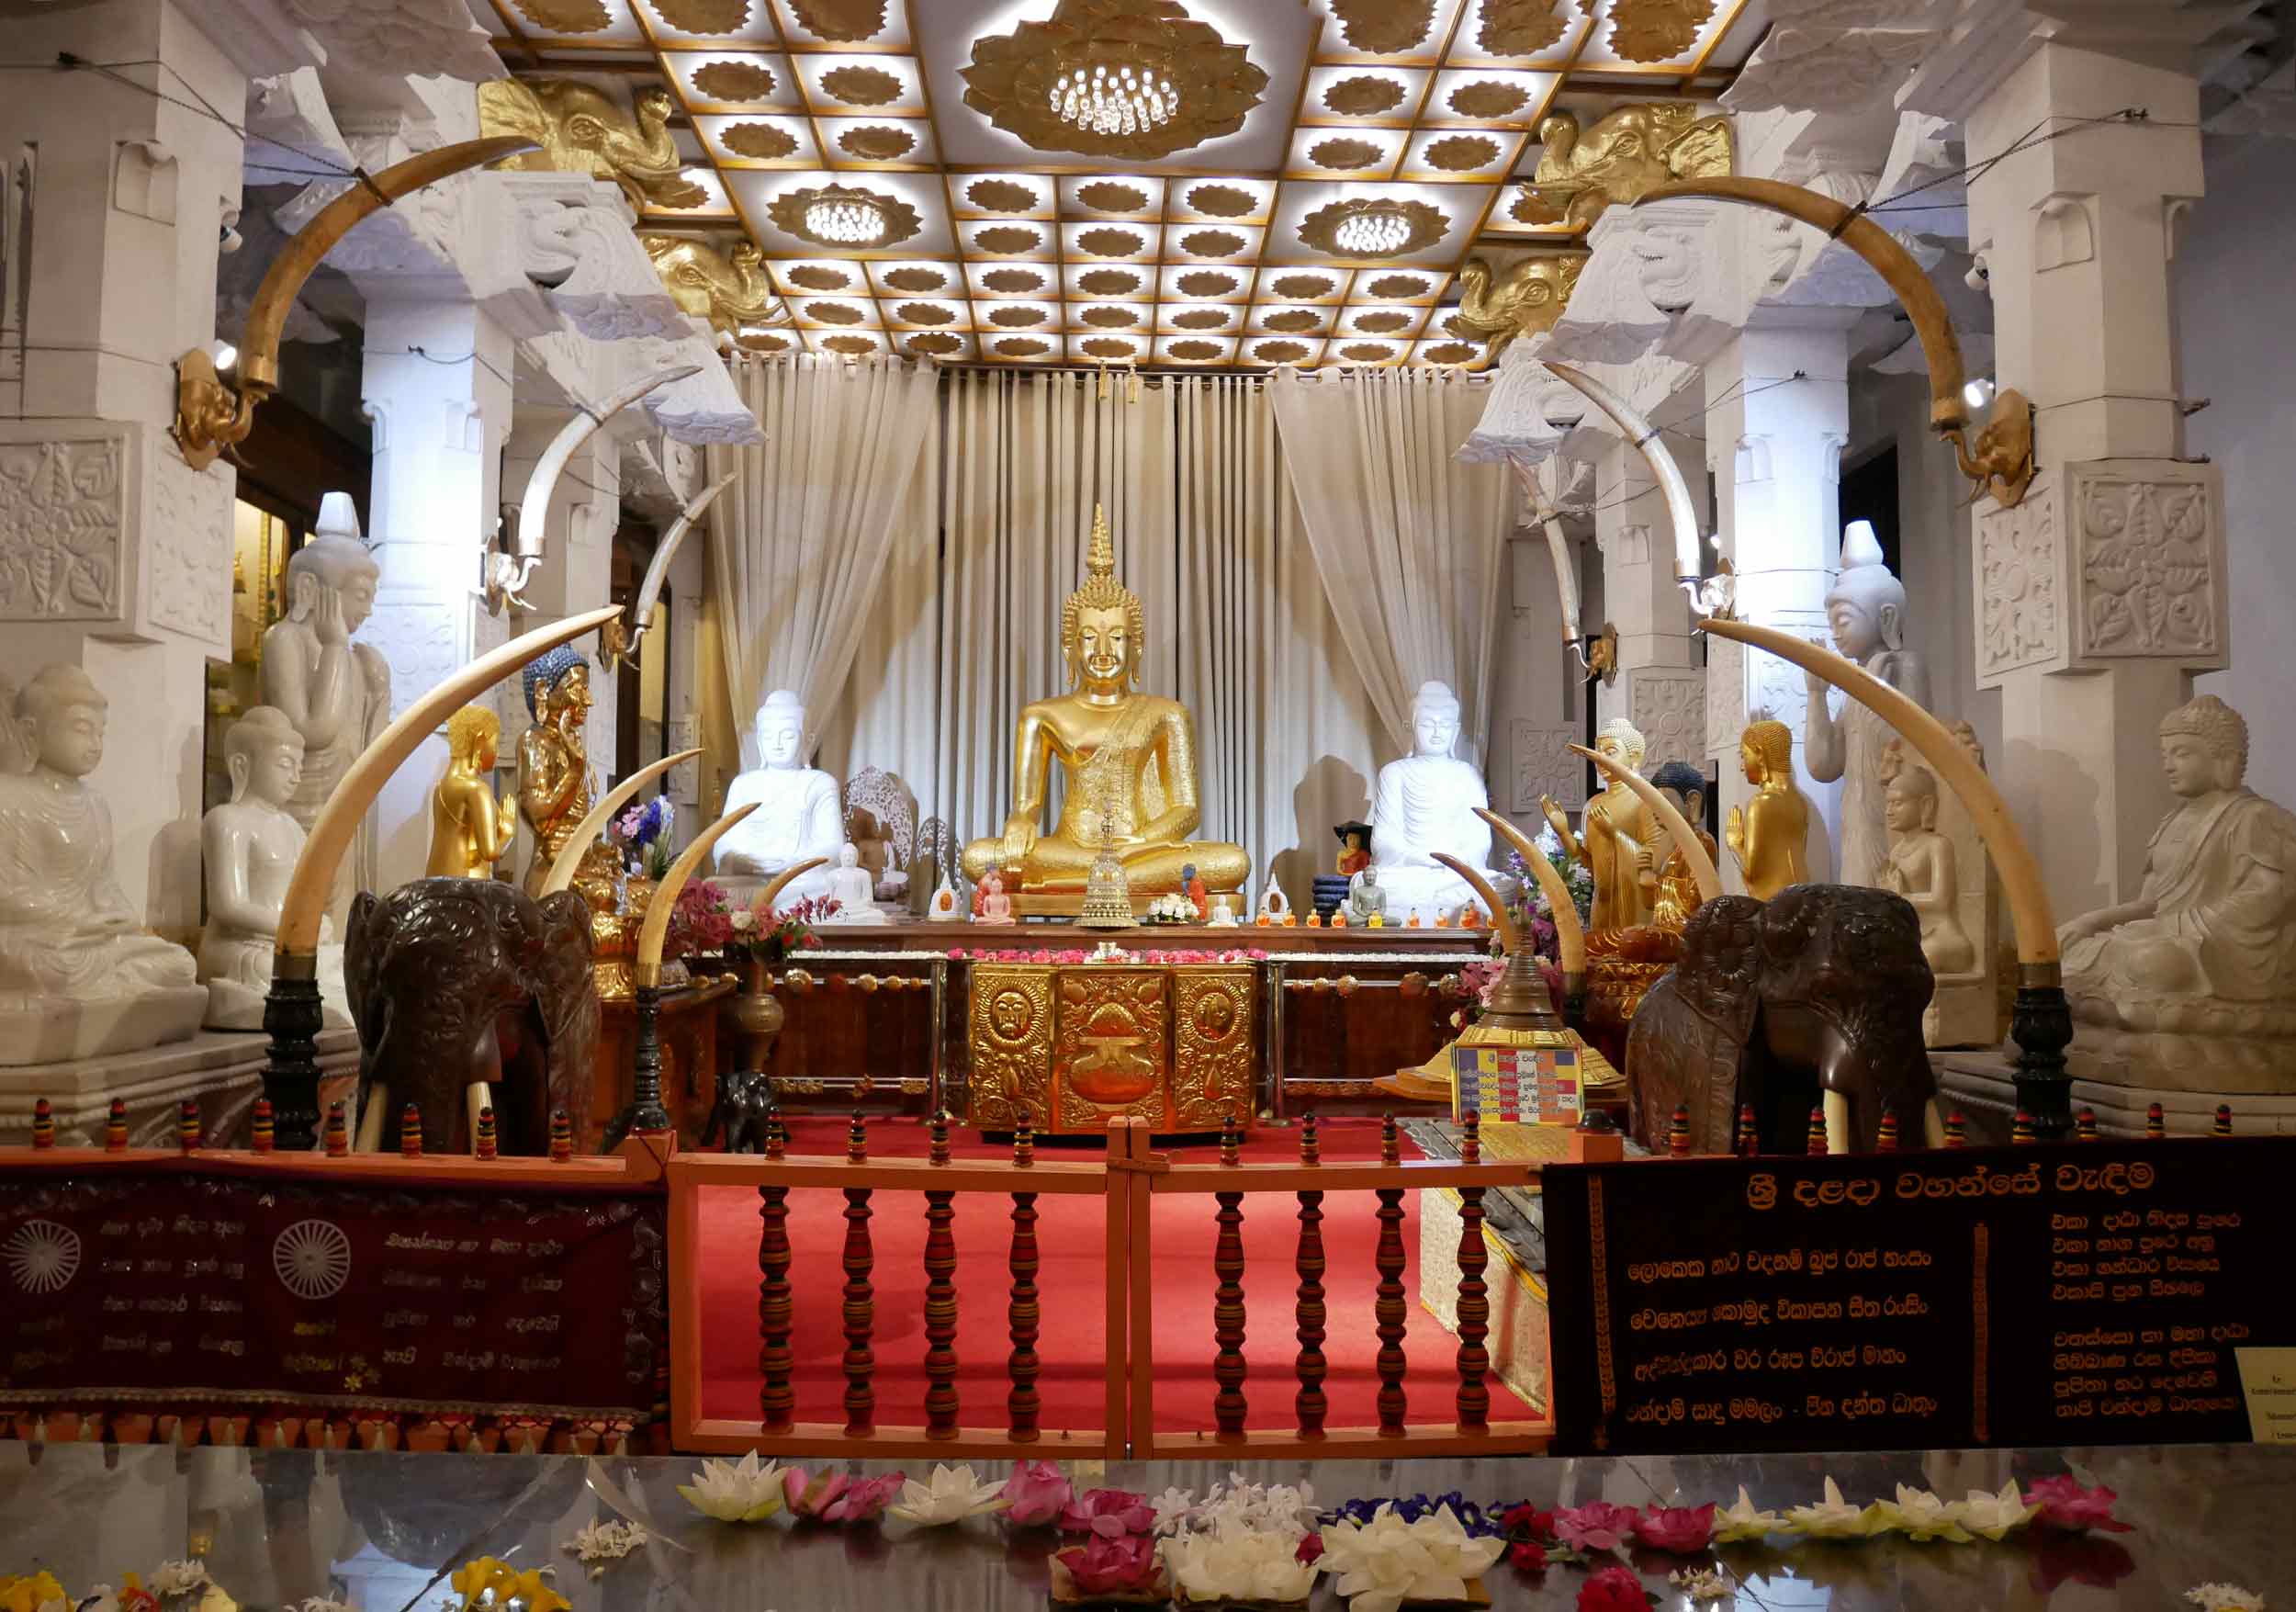  Statue of Lord Buddha in Kandy's Temple of the Sacred Tooth Relic (Dec 13). 